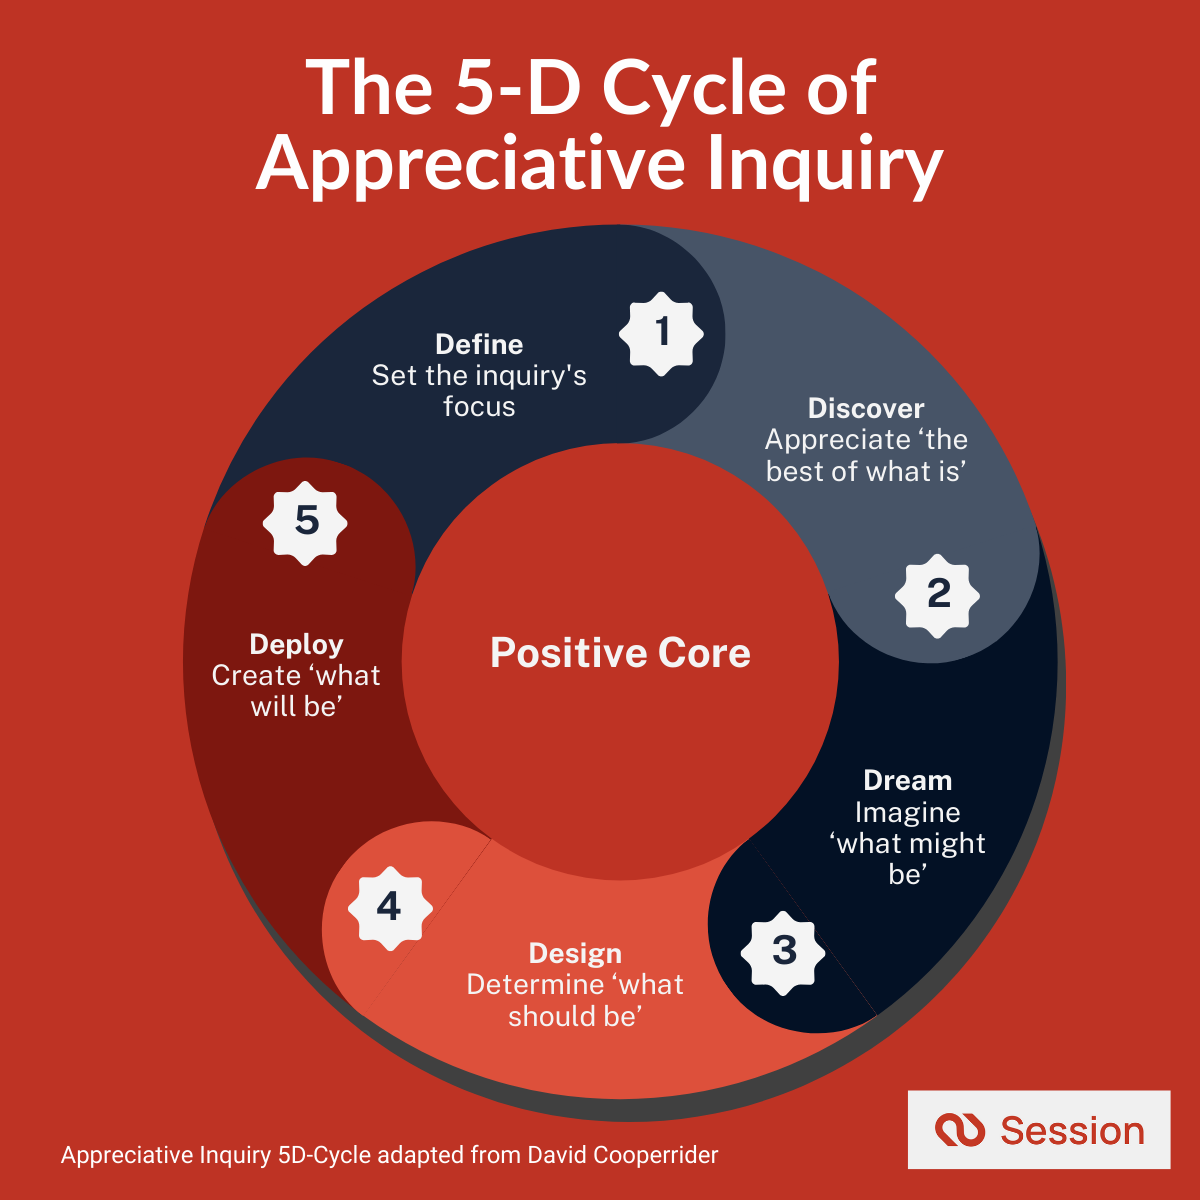 Illustration of the 5-D Cycle of Appreciative Inquiry